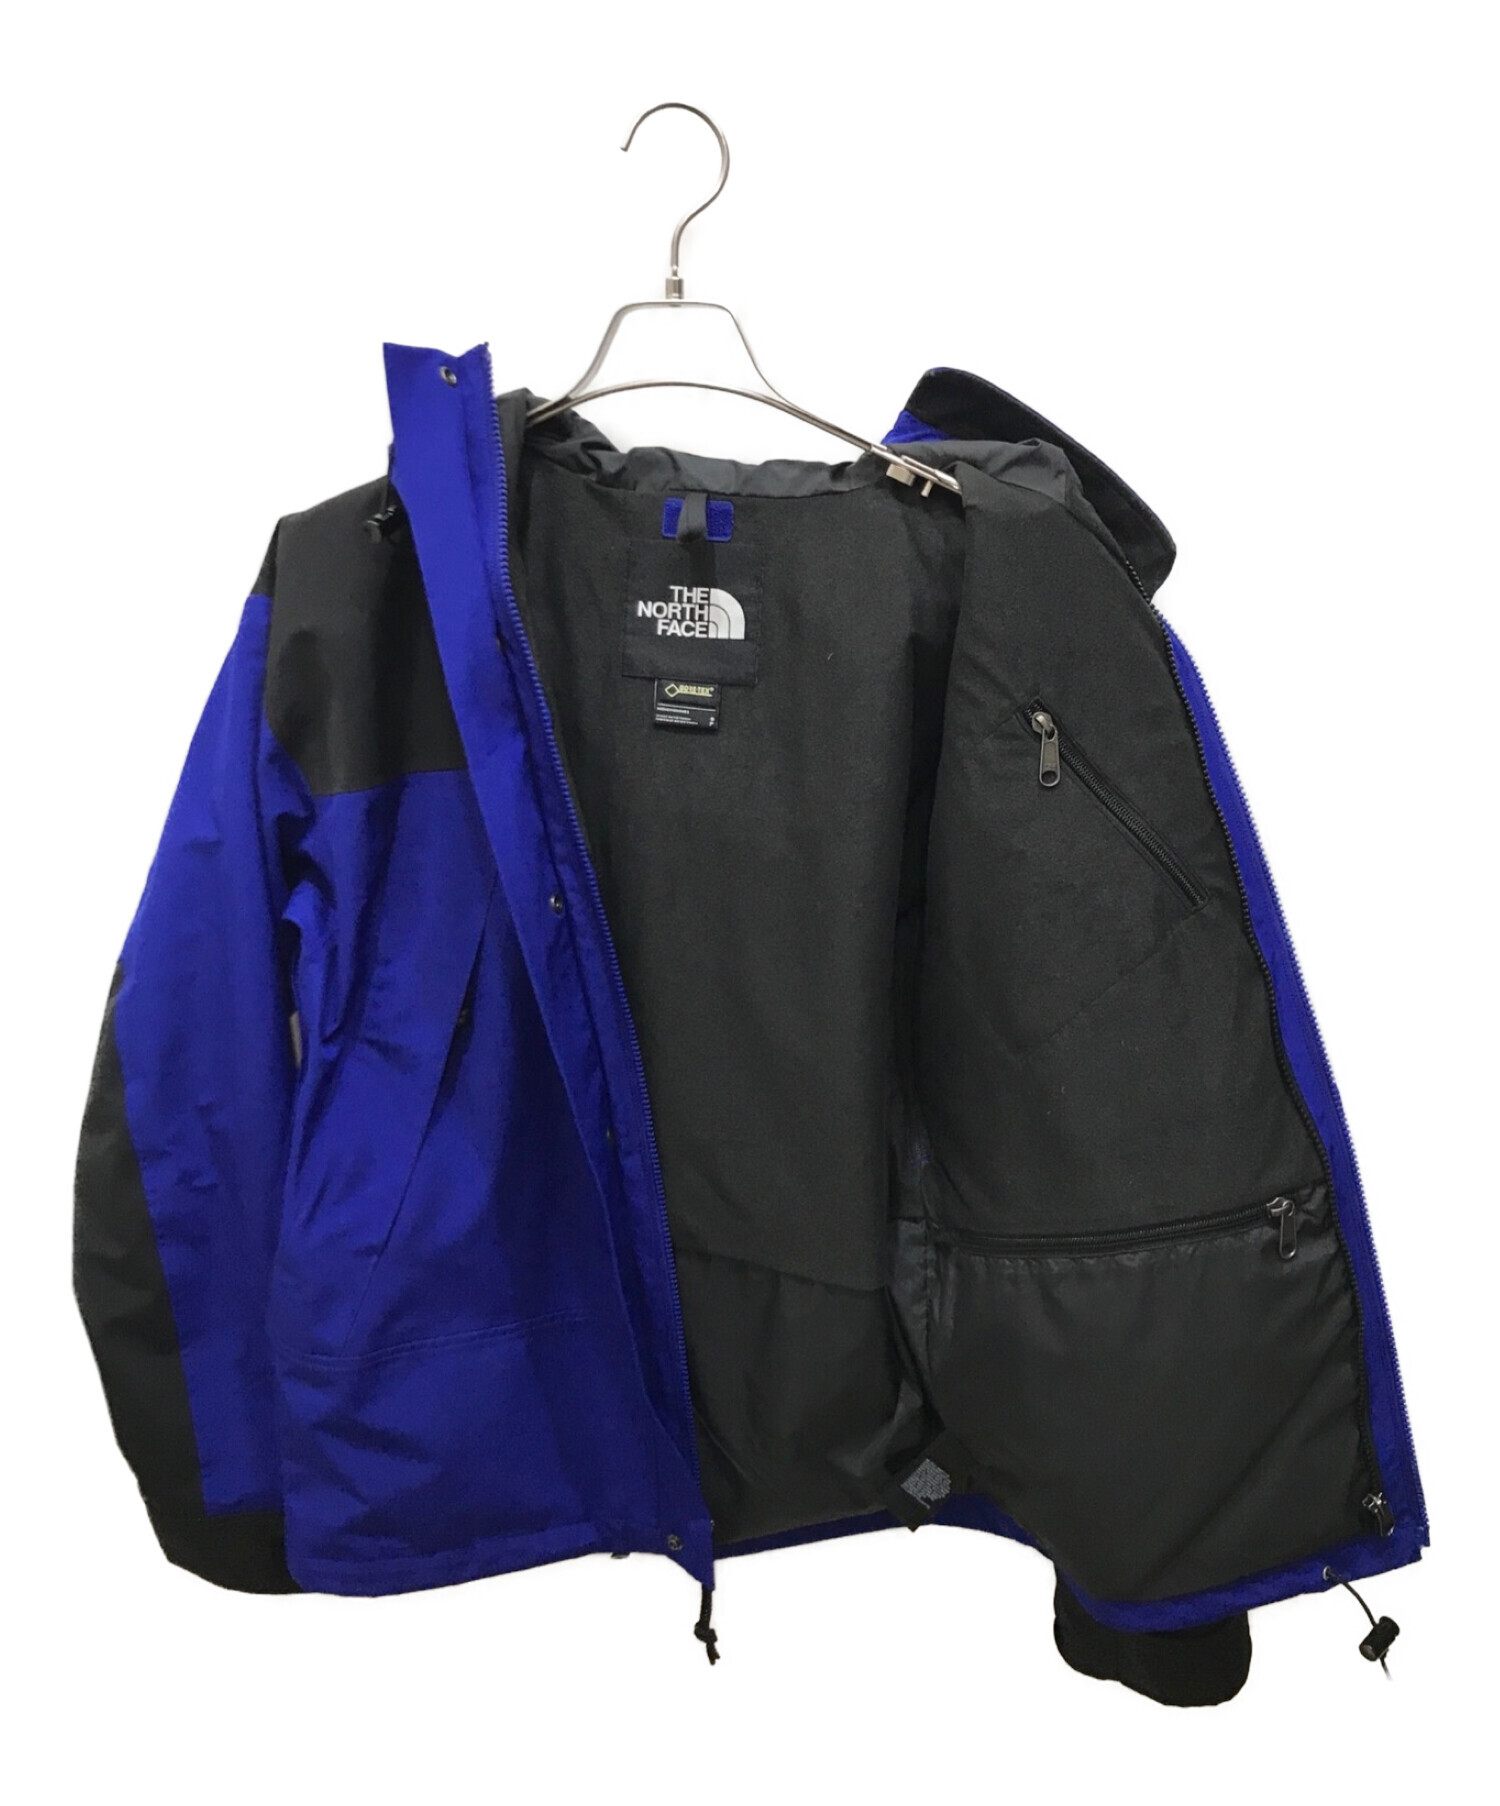 THE NORTH FACE ノースフェイス 1990 MOUNTAIN JACKET GORE-TEX NP2182 